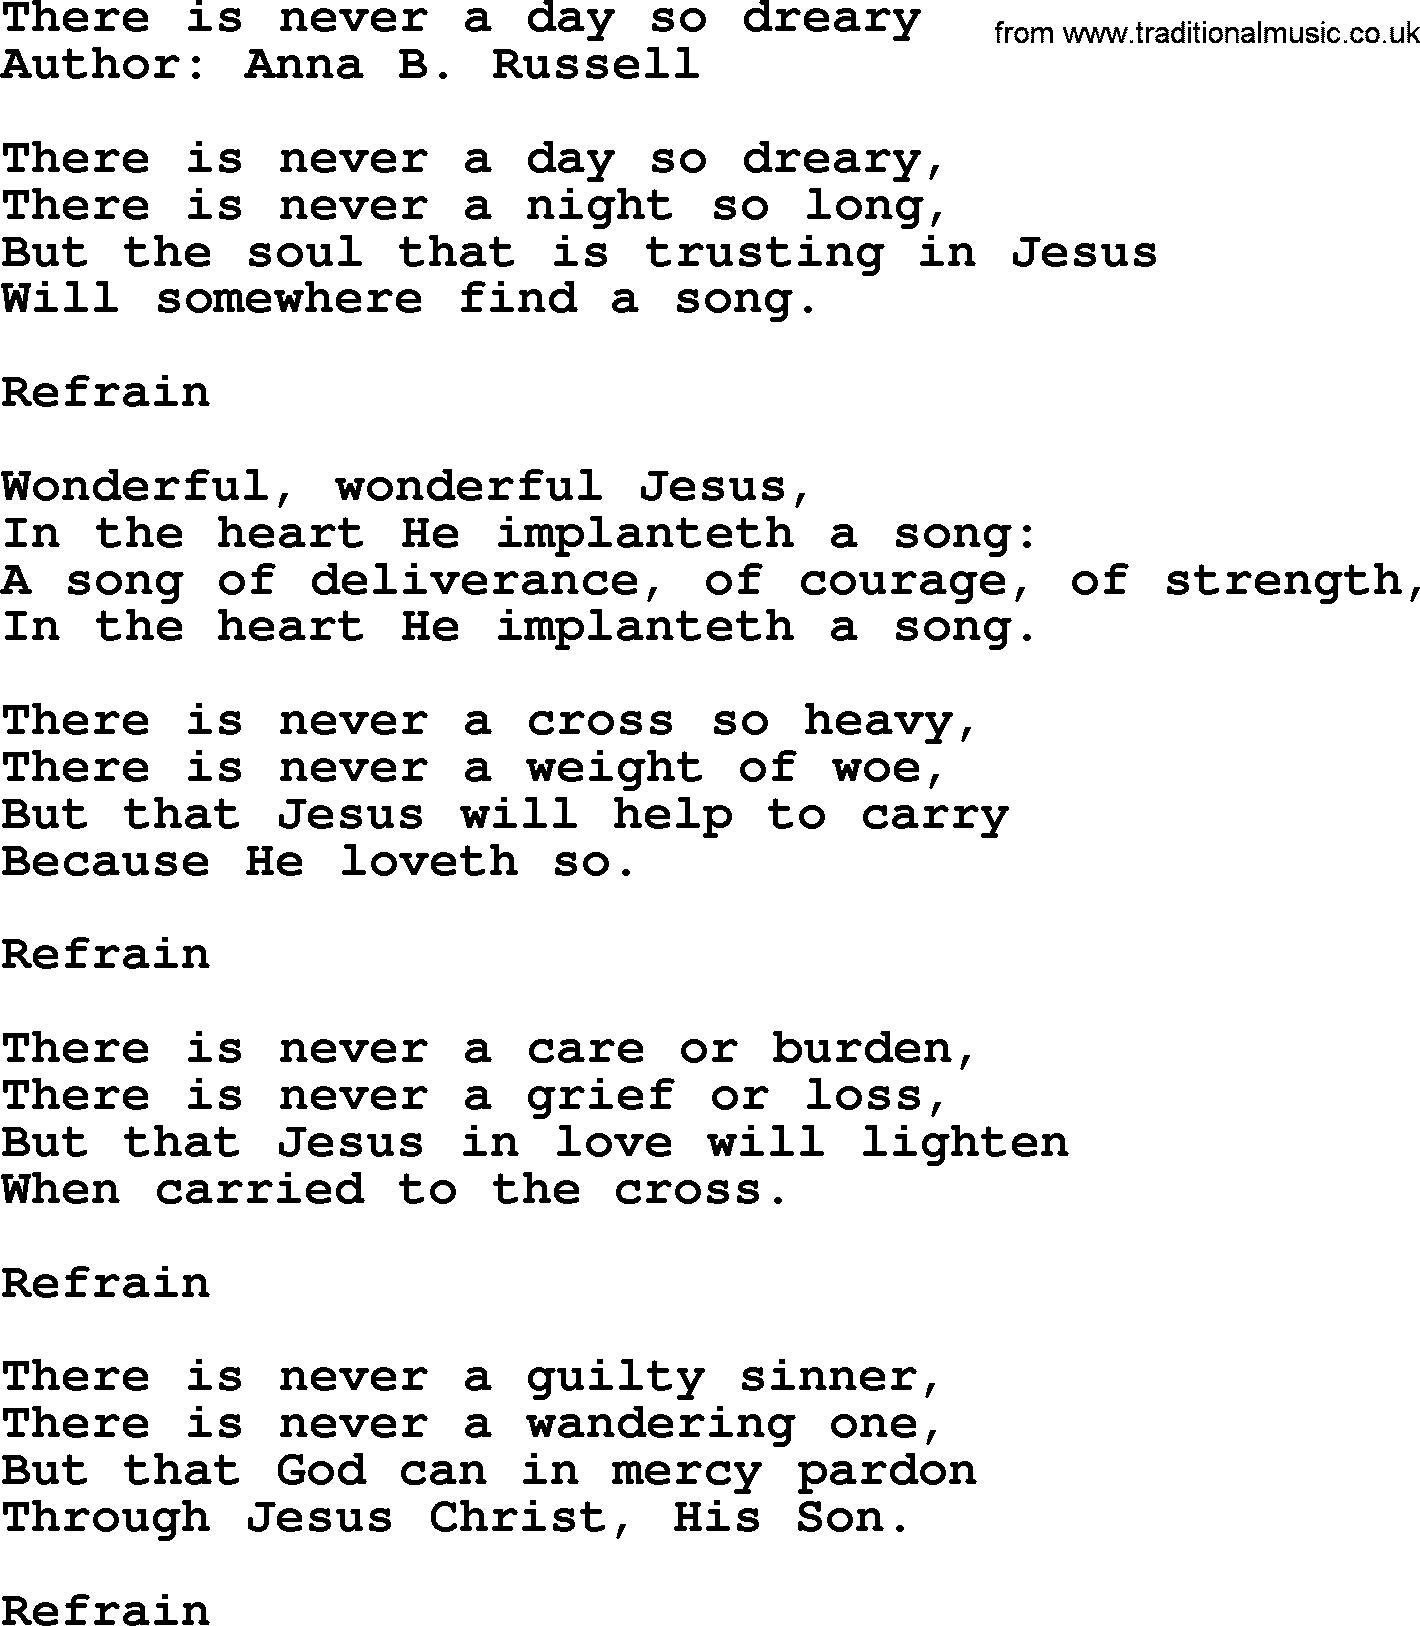 Top 500 Hymn: There Is Never A Day So Dreary, lyrics